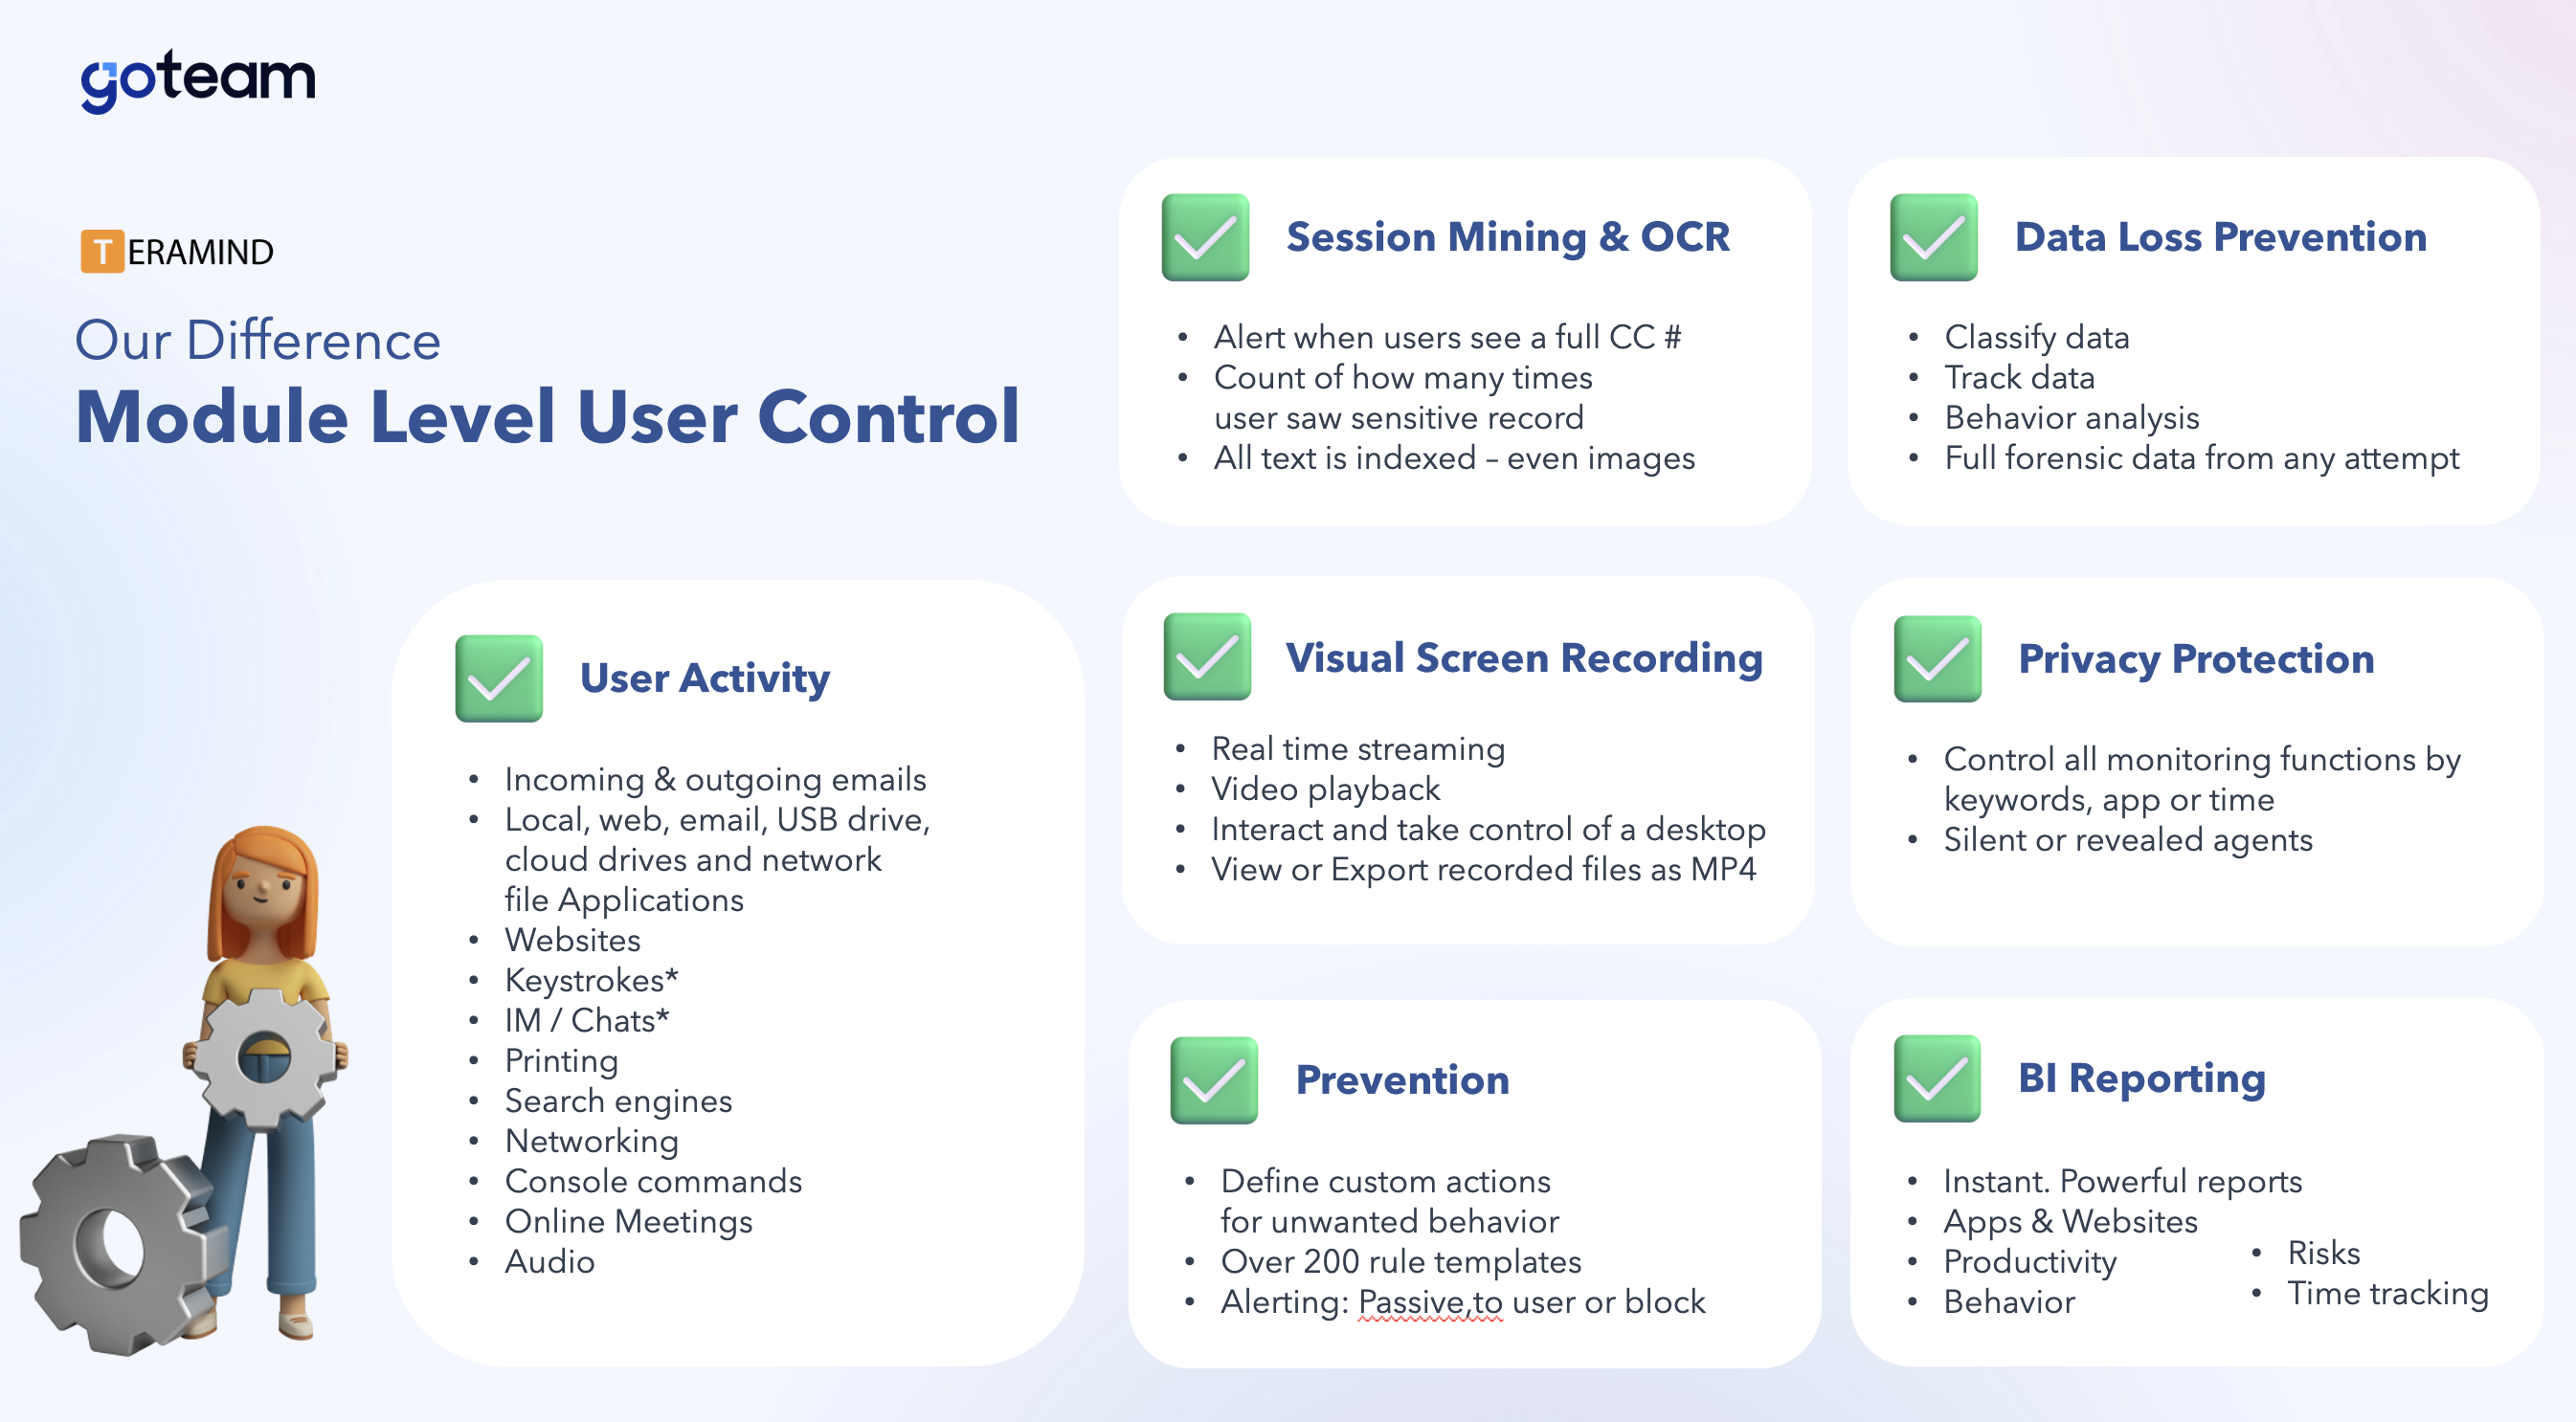 Key specifications of GoTeam's unique approach on user control compared to Teramind's